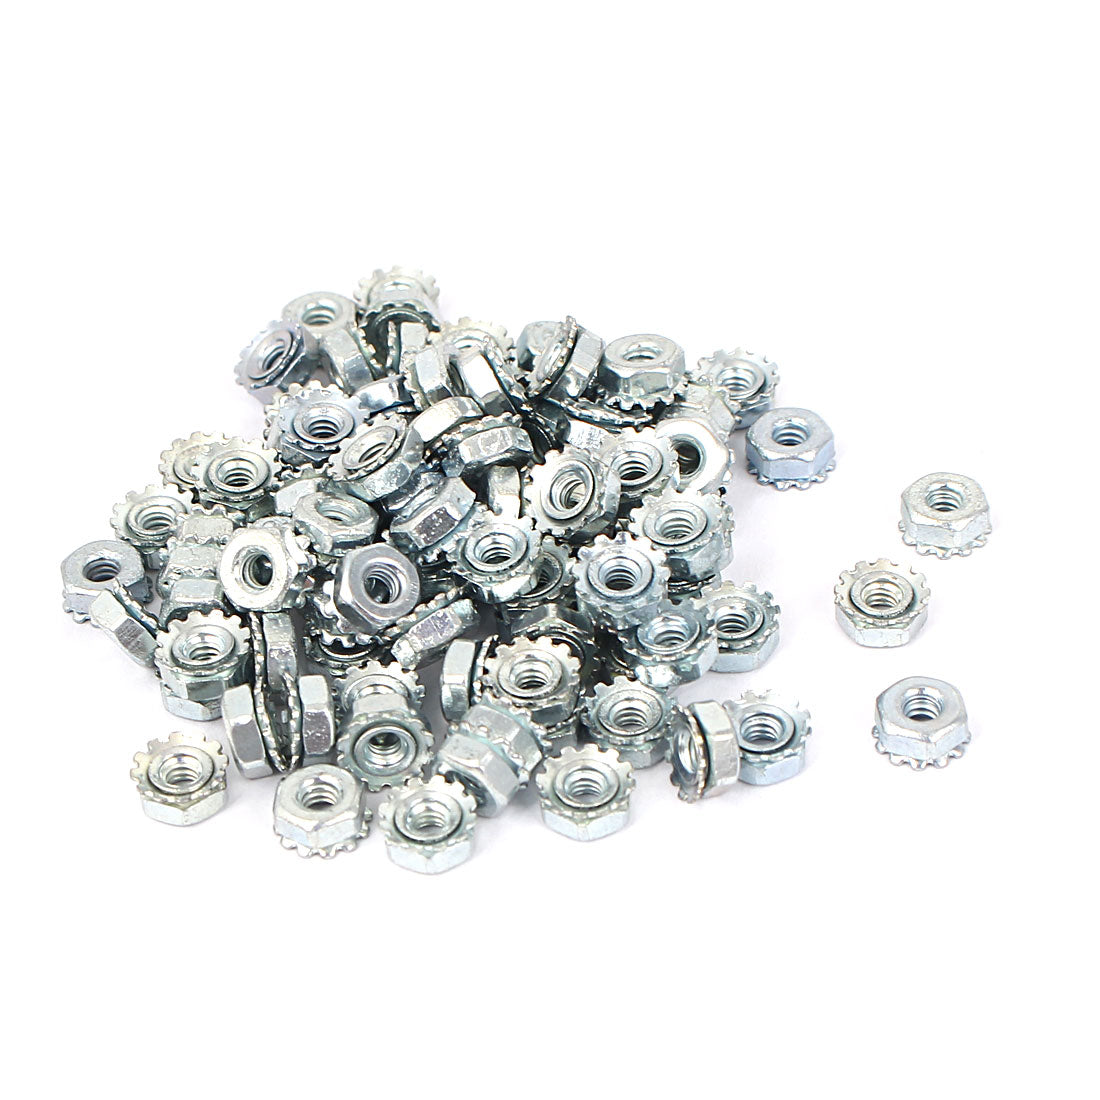 uxcell Uxcell 4#-40 Female Thread Zinc Plated Kep Hex Star Lock Nut 100pcs